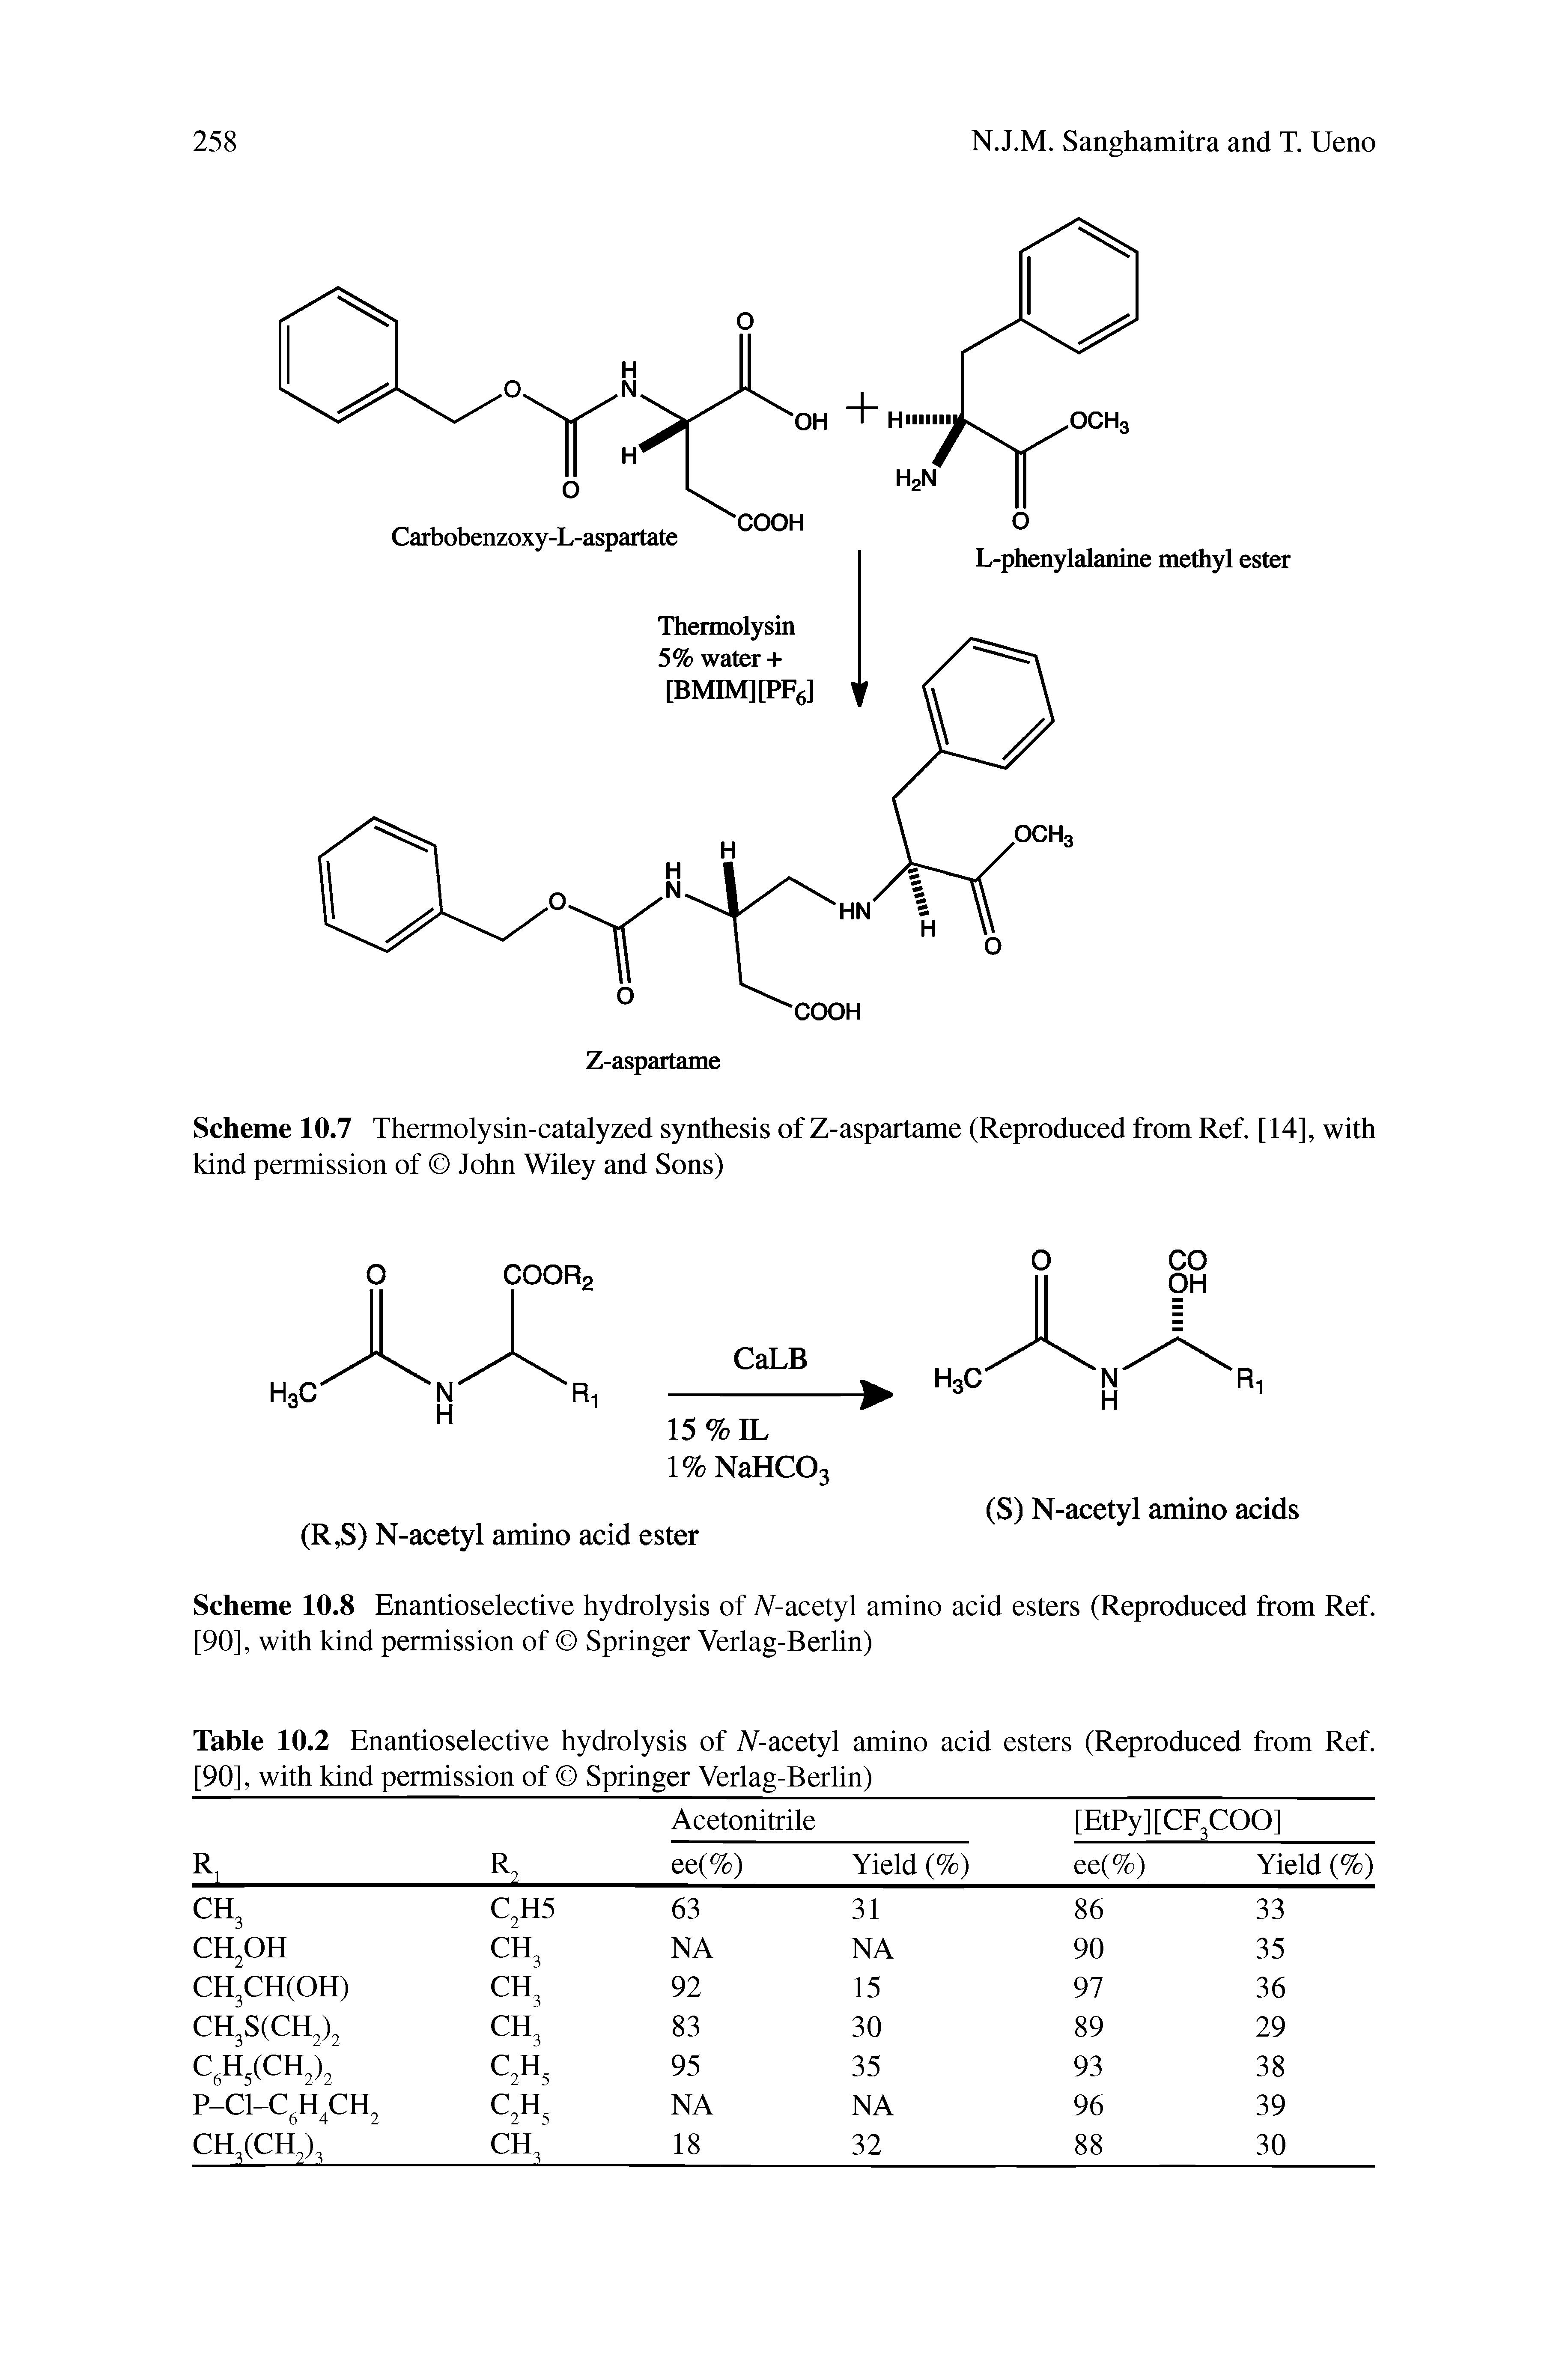 Scheme 10.8 Enantioselective hydrolysis of A -acetyl amino acid esters (Reproduced from Ref. [90], with kind permission of Springer Verlag-Berlin)...